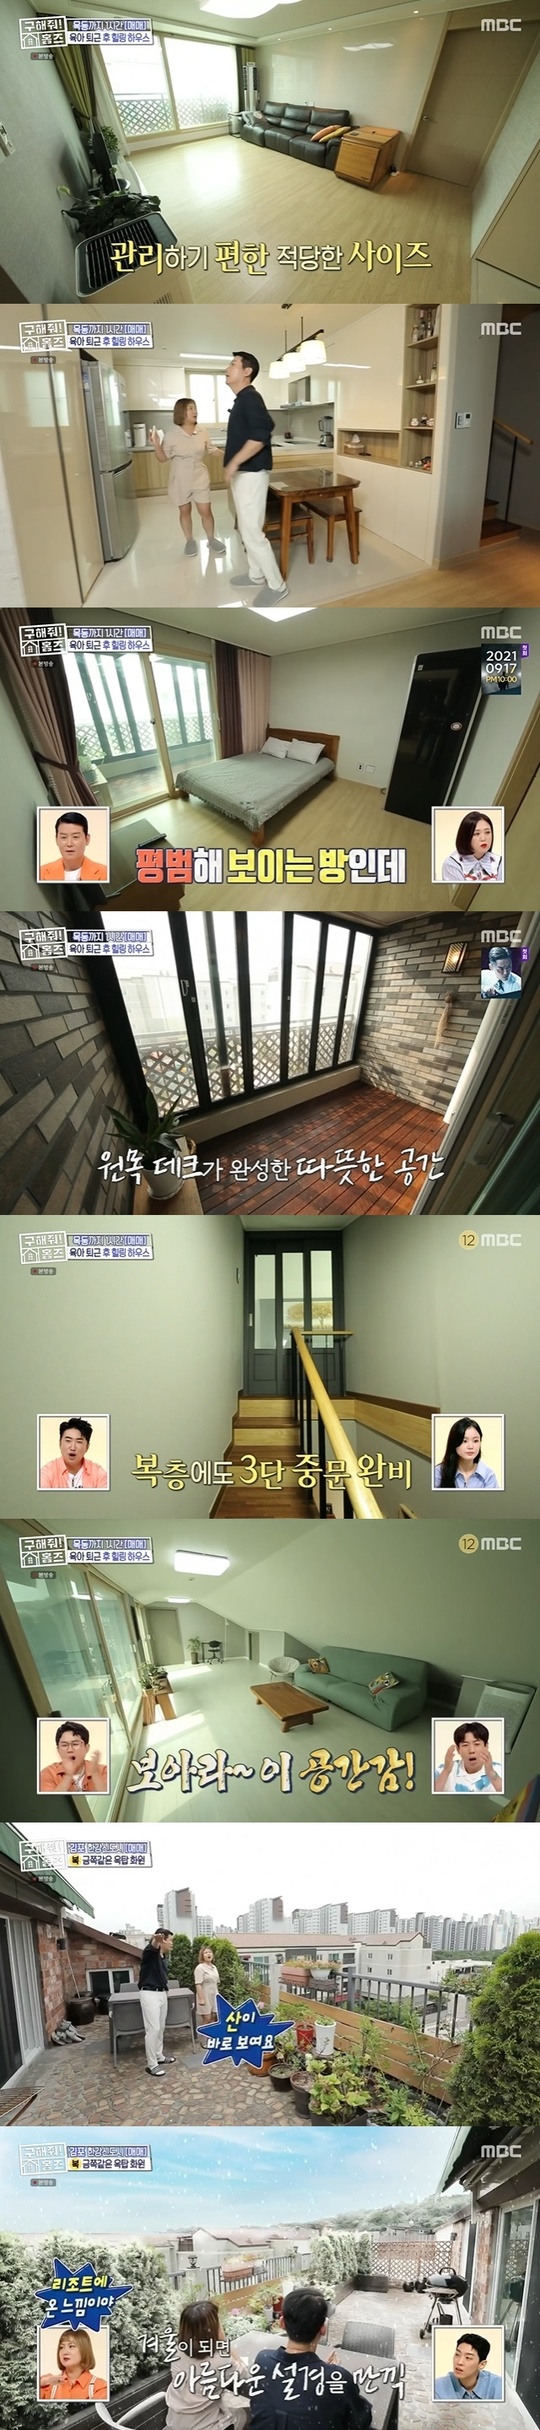 Thanks to European Veranda, Gimpo Han River City House, which feels like a Power house even though it is a city-type living house, was introduced.In the 123rd MBC entertainment Where is My Home (hereinafter referred to as Homes) broadcast on September 12, a grandmother who finds a house capable of parenting within an hour of Exo to the Seoul Mok-dong distinct with her daughters house appeared as The Client.The Client hoped for three rooms with a space to decorate the flower beds of Seoul or Gyeonggi area and a resting park around them, with a budget of up to 800 million won.The team headed for Jang Gi-dong, Han Riversin City, Gimpo.It took 55 minutes to Exo to the daughters house, Mok-dong distinct, and a park, a 10-minute walk away, had a long-term station.The sale was the top floor of the City-type living house, which combined the merits of Power House and Apartment.The open living room was the right size for The Client to write alone, and the white-toned kitchen was a convenient deja structure with a lot of storage space and was efficient.This house had highlights all over the house.There was a balcony with a folding door and a drainage facility on the wide wooden floor in the room, and the remaining two rooms were connected to the connecting room, so it was fun to use if the grandchild came to play.The second floor space was the most special: beyond the third floor, a very large double-story space and a European Veranda called Italian by Park Na-rae.Veranda, which consists of red bricks, rock floors, basic options, earnings and tables, was impressed by this is really like a Power house.The house, which can be used as the Client wants in the outdoors, was named Golden Rooftop Garden.